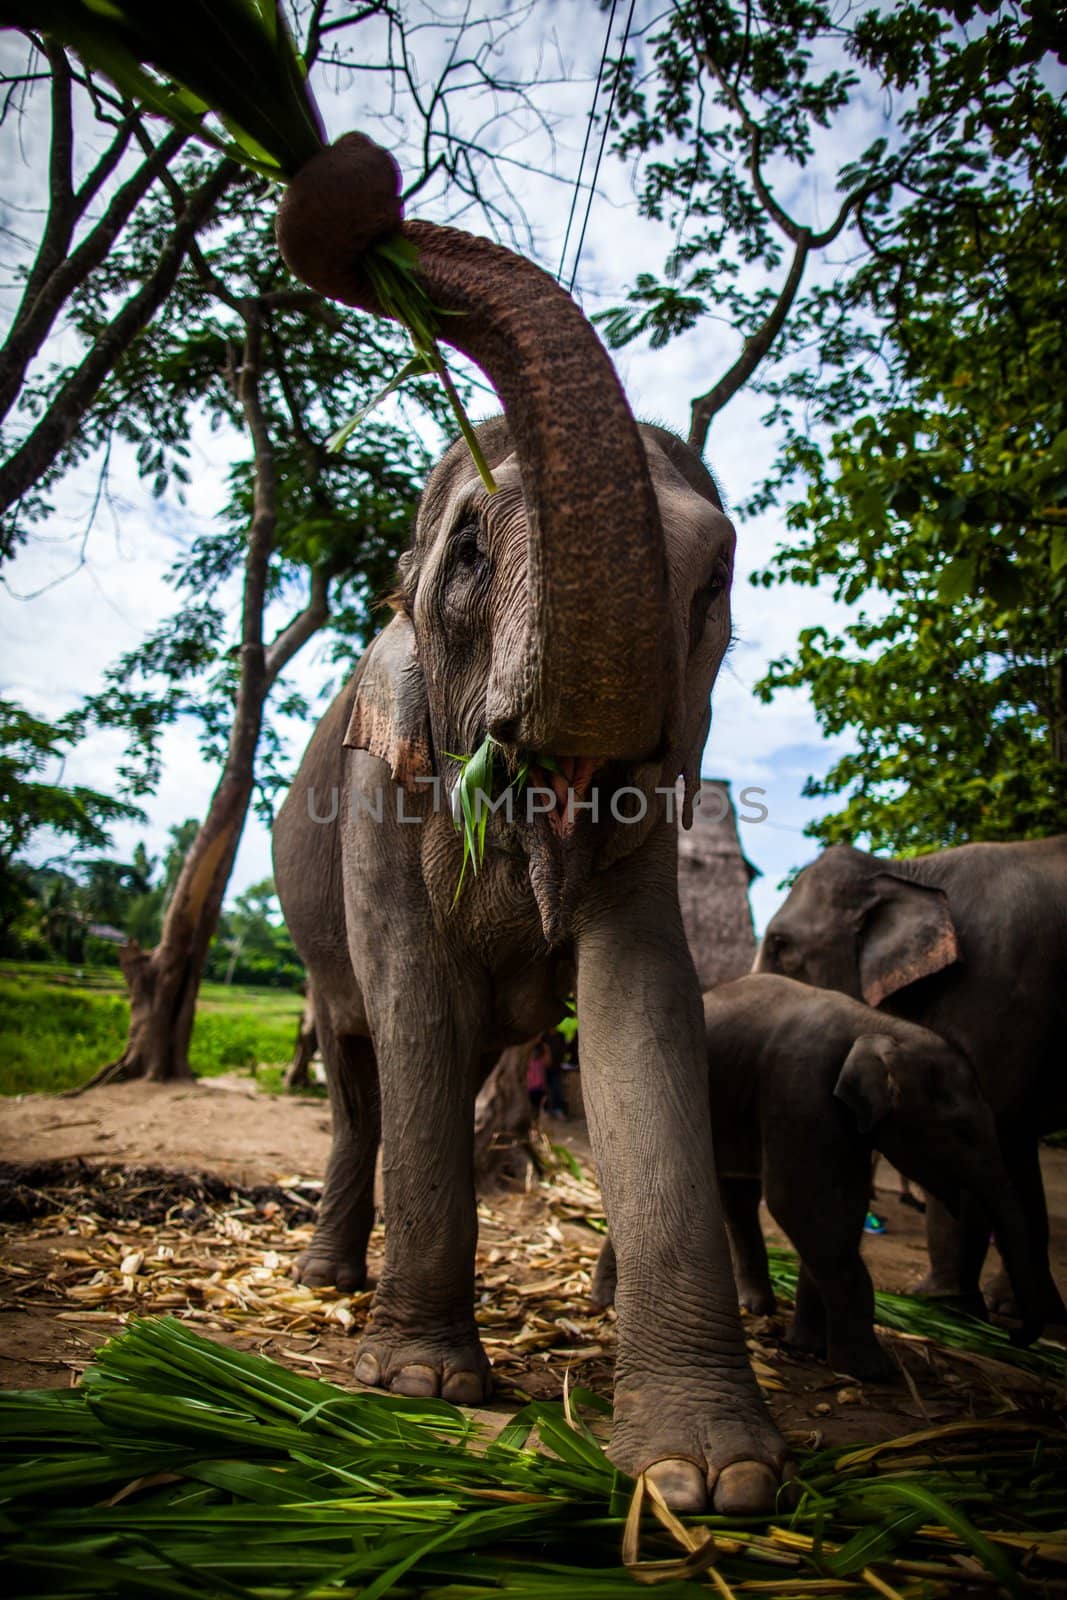 Mature female elephant with sugarcane in its mouth eating off the ground, trunk in the air. by hangingpixels